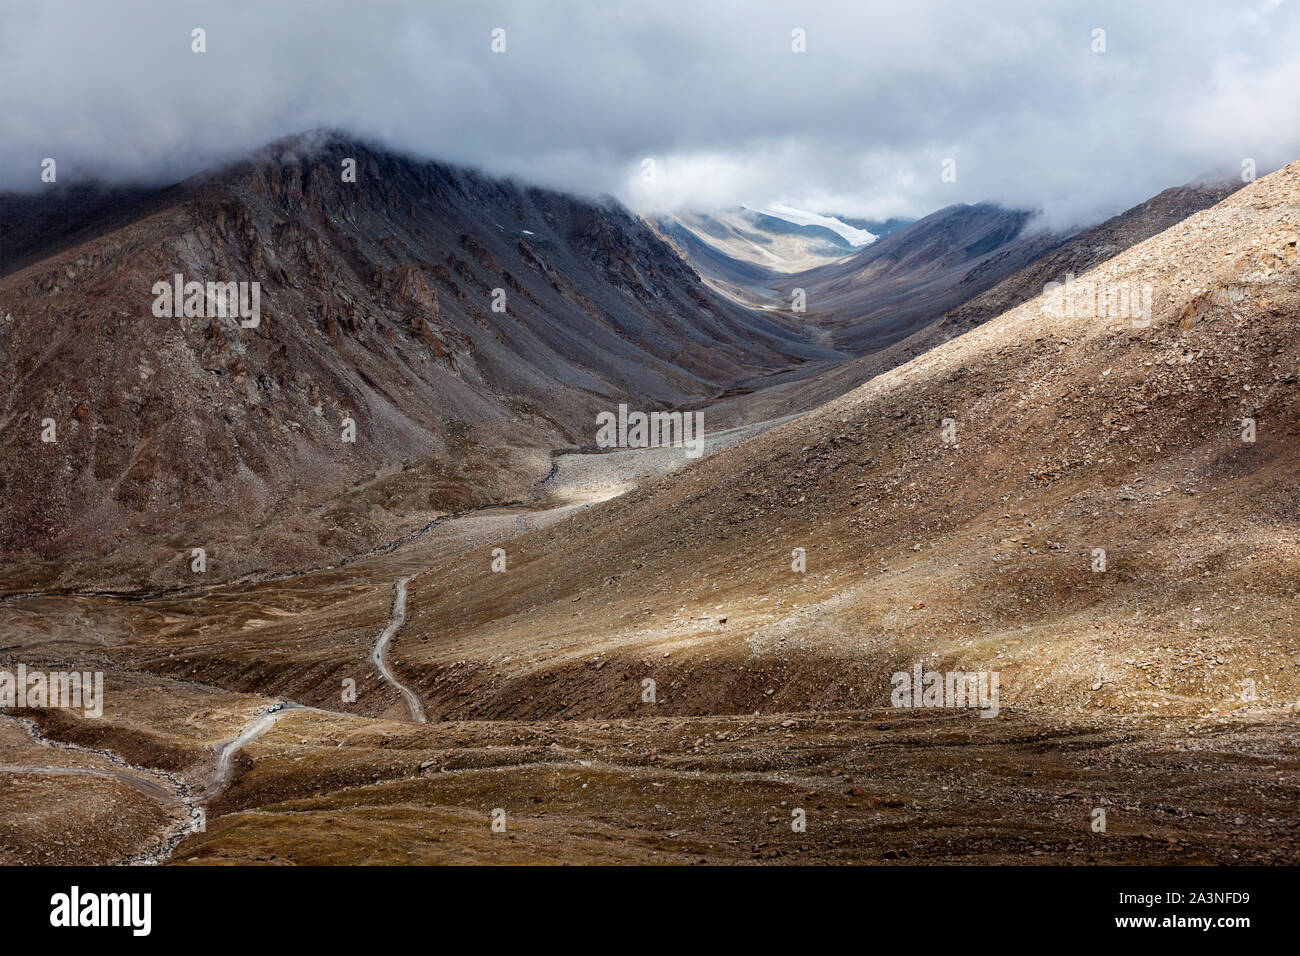 Himalayan landscape with road Stock Photo